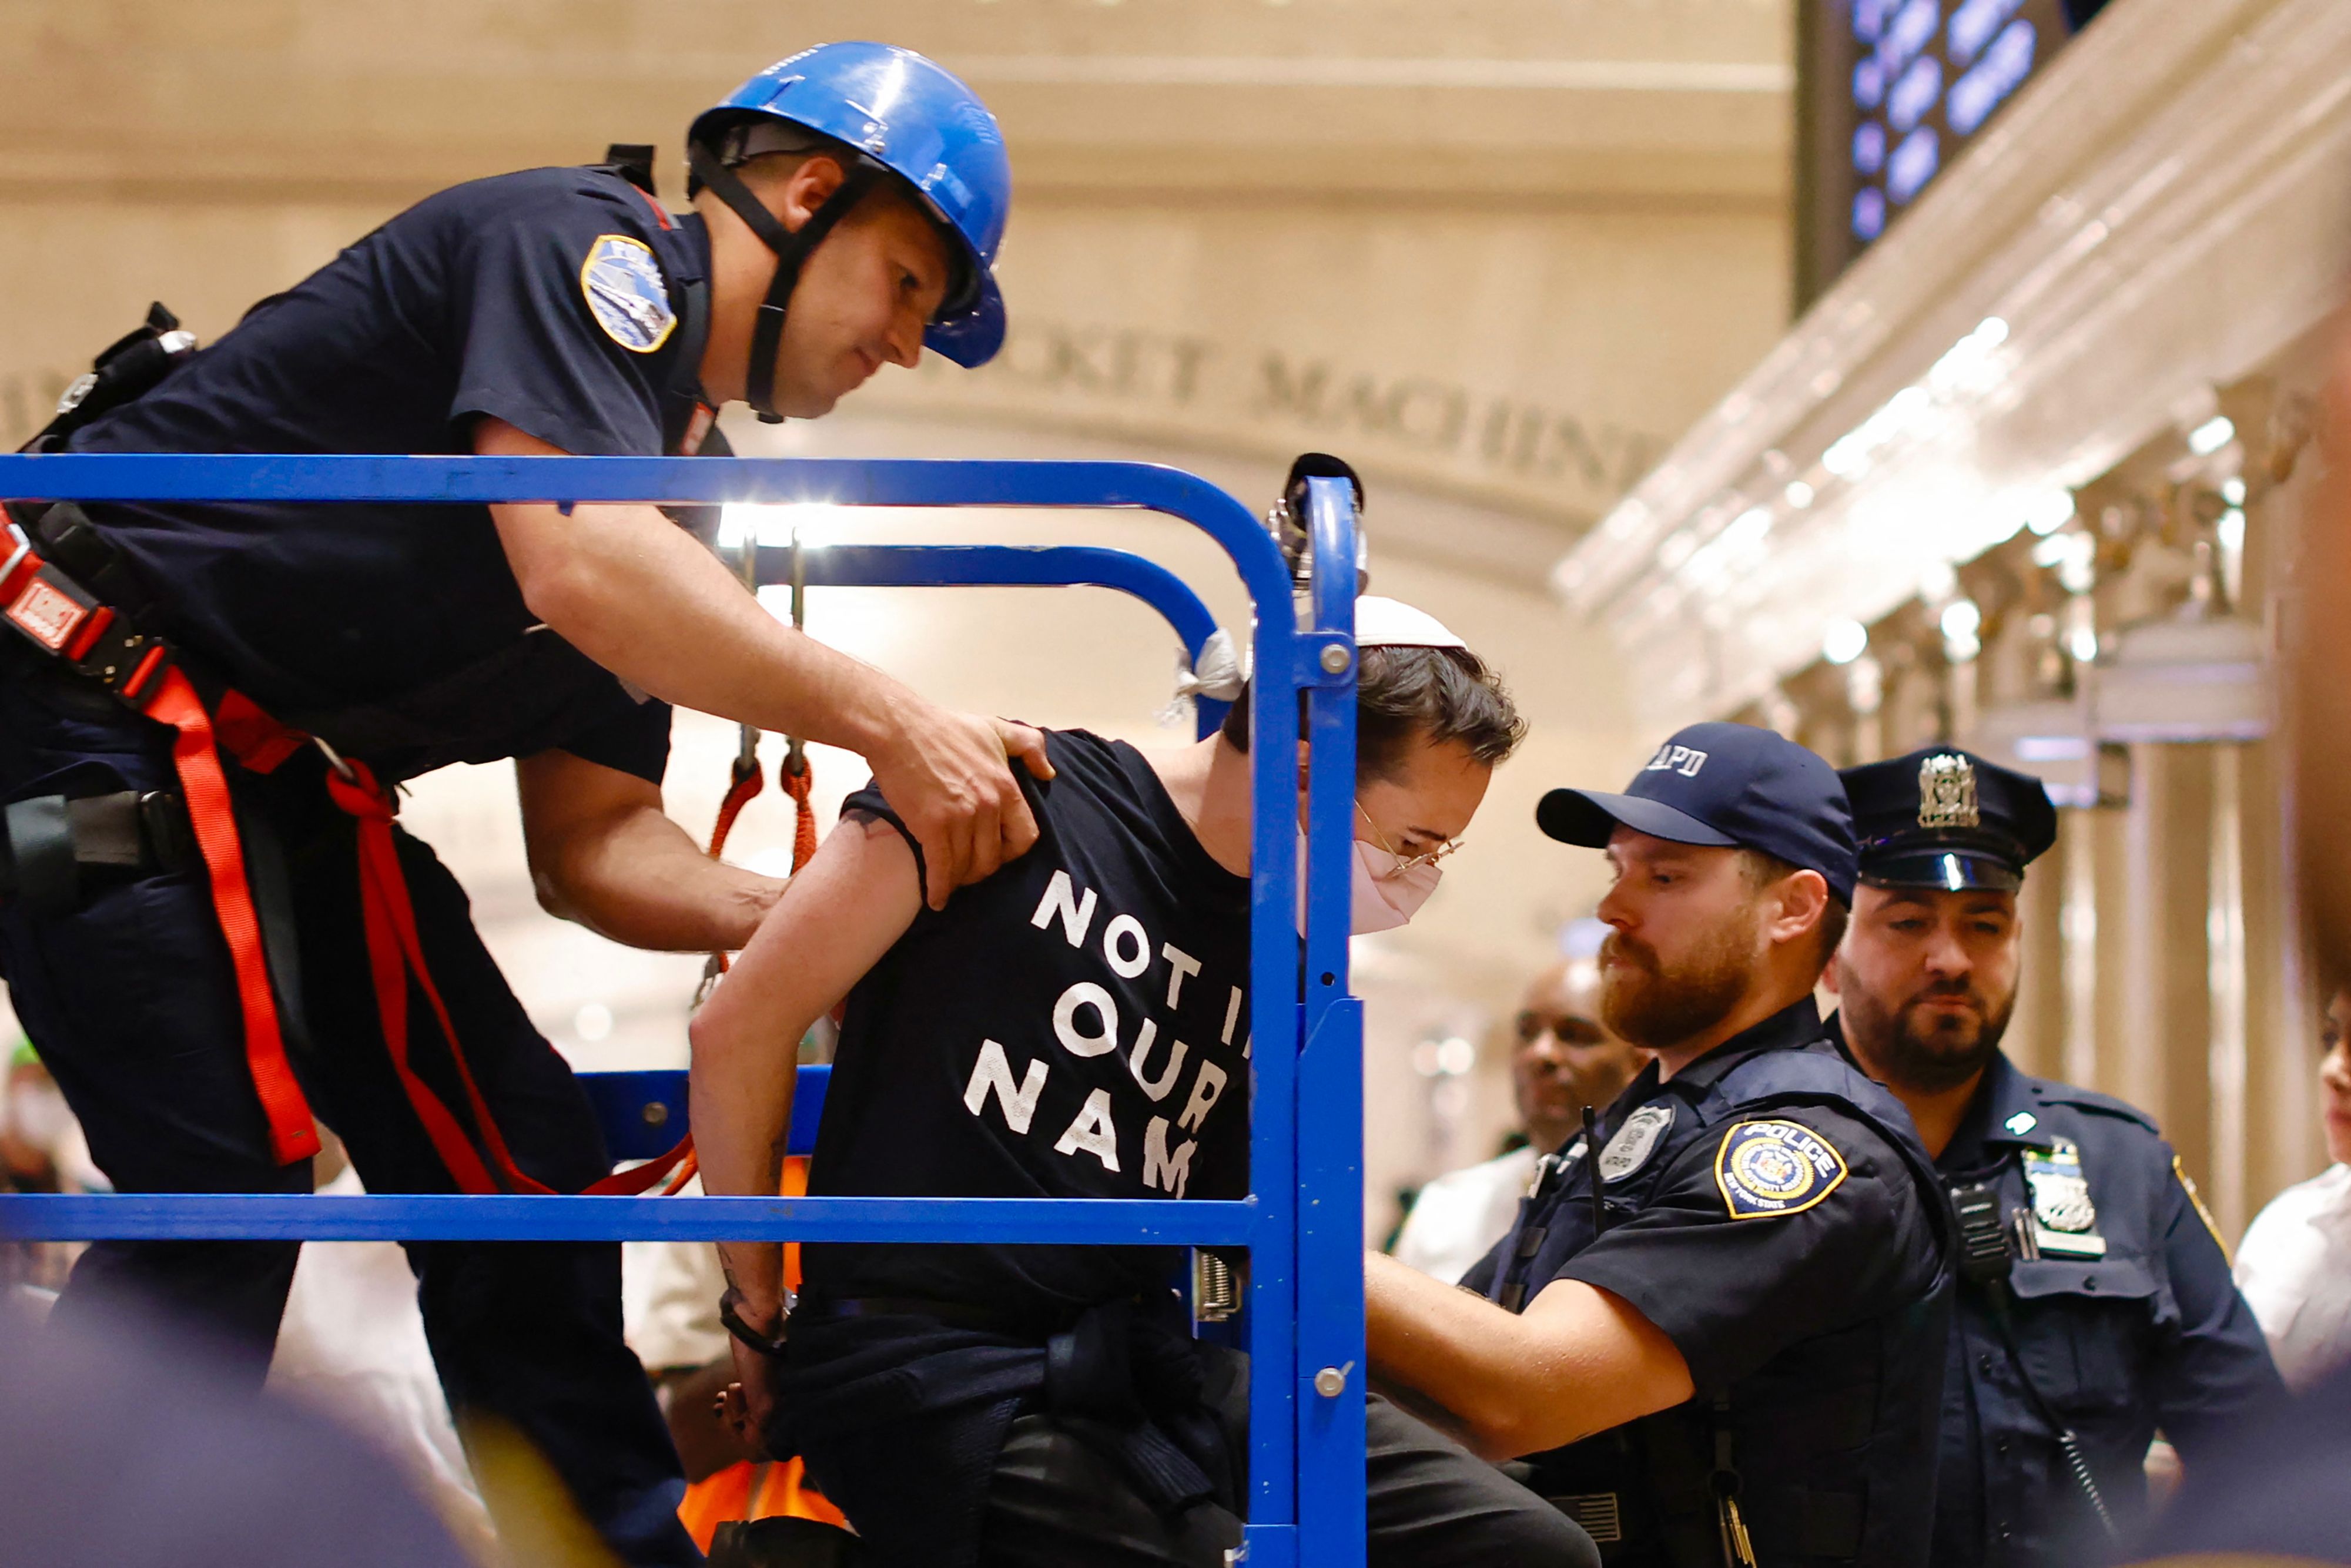 NYPD officers arrest a protester during a demonstration calling for a cease-fire amid war between Israel and Hamas, at Grand Central Station in New York City, on October 27.